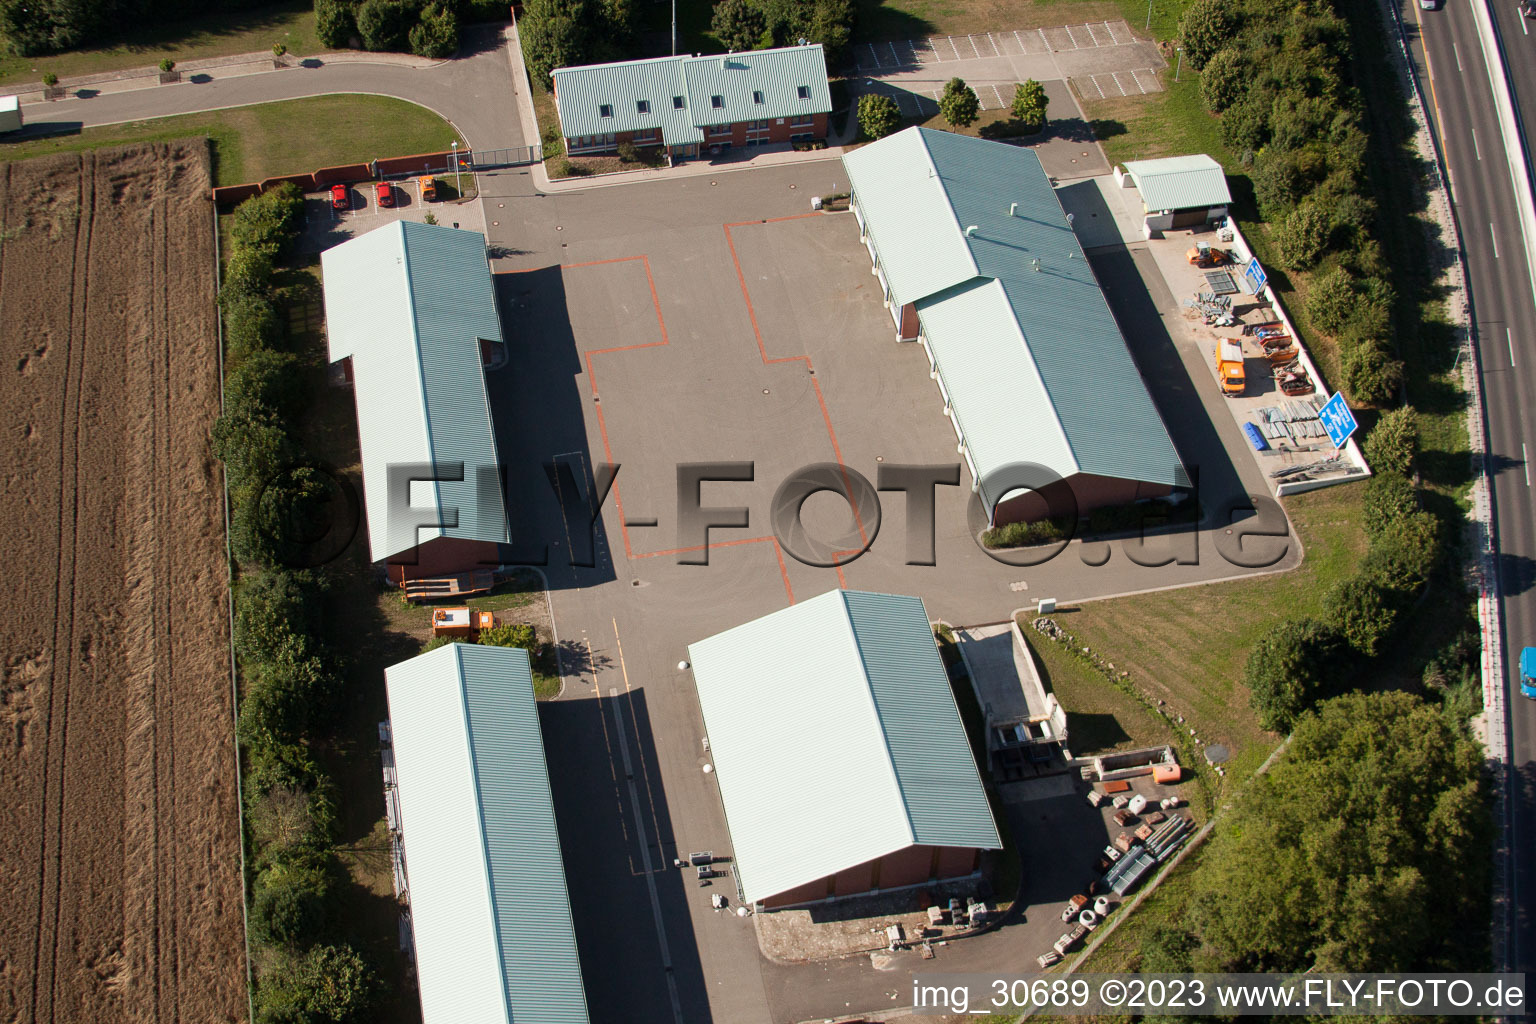 Aerial photograpy of Highway maintenance department in Kandel in the state Rhineland-Palatinate, Germany